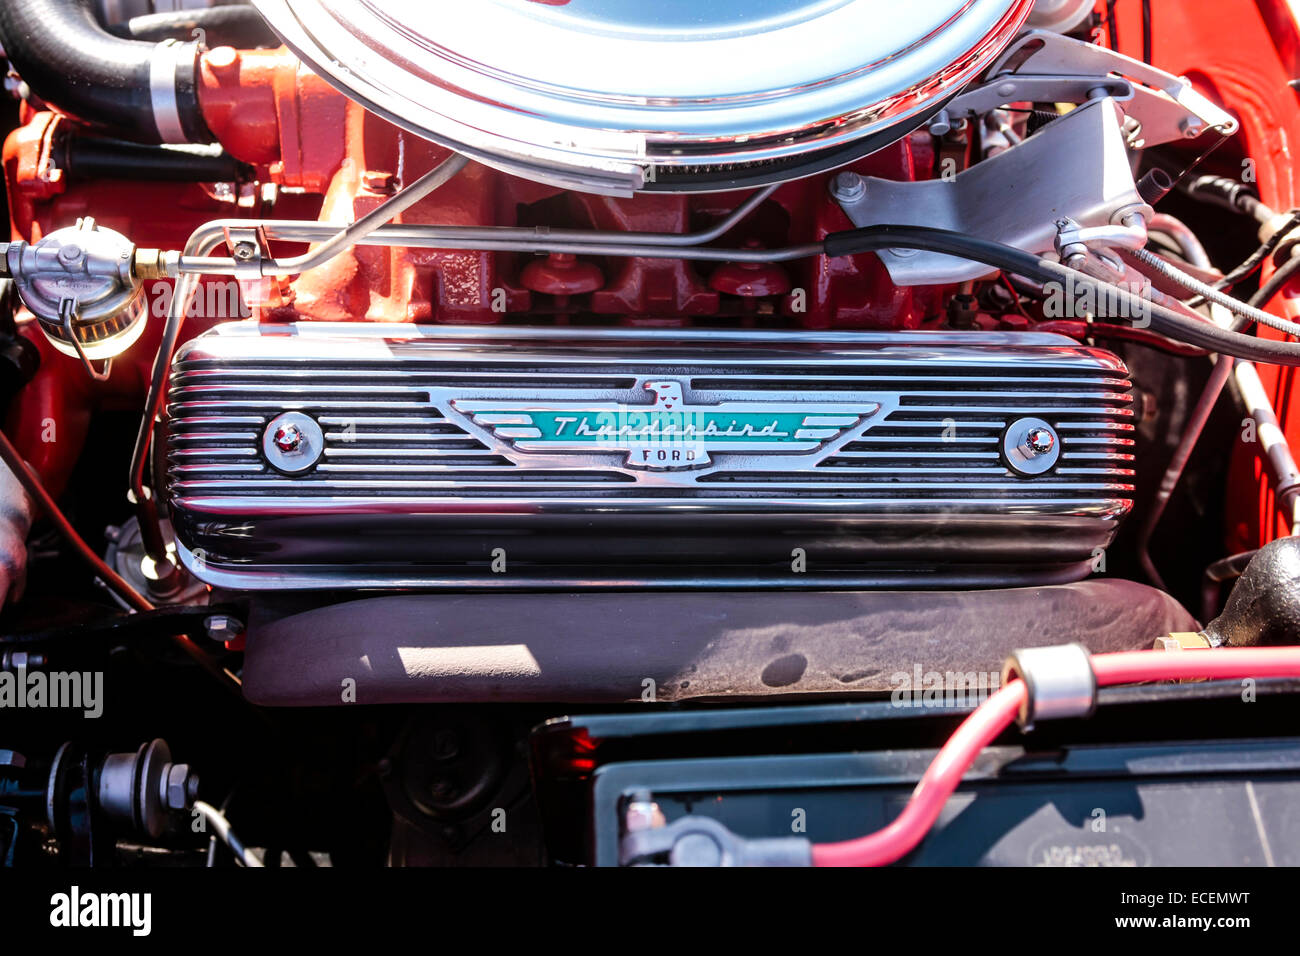 1957 Red Ford Thunderbird V8 292 cu engine on display at a vintage vehicle show in S. Florida Stock Photo